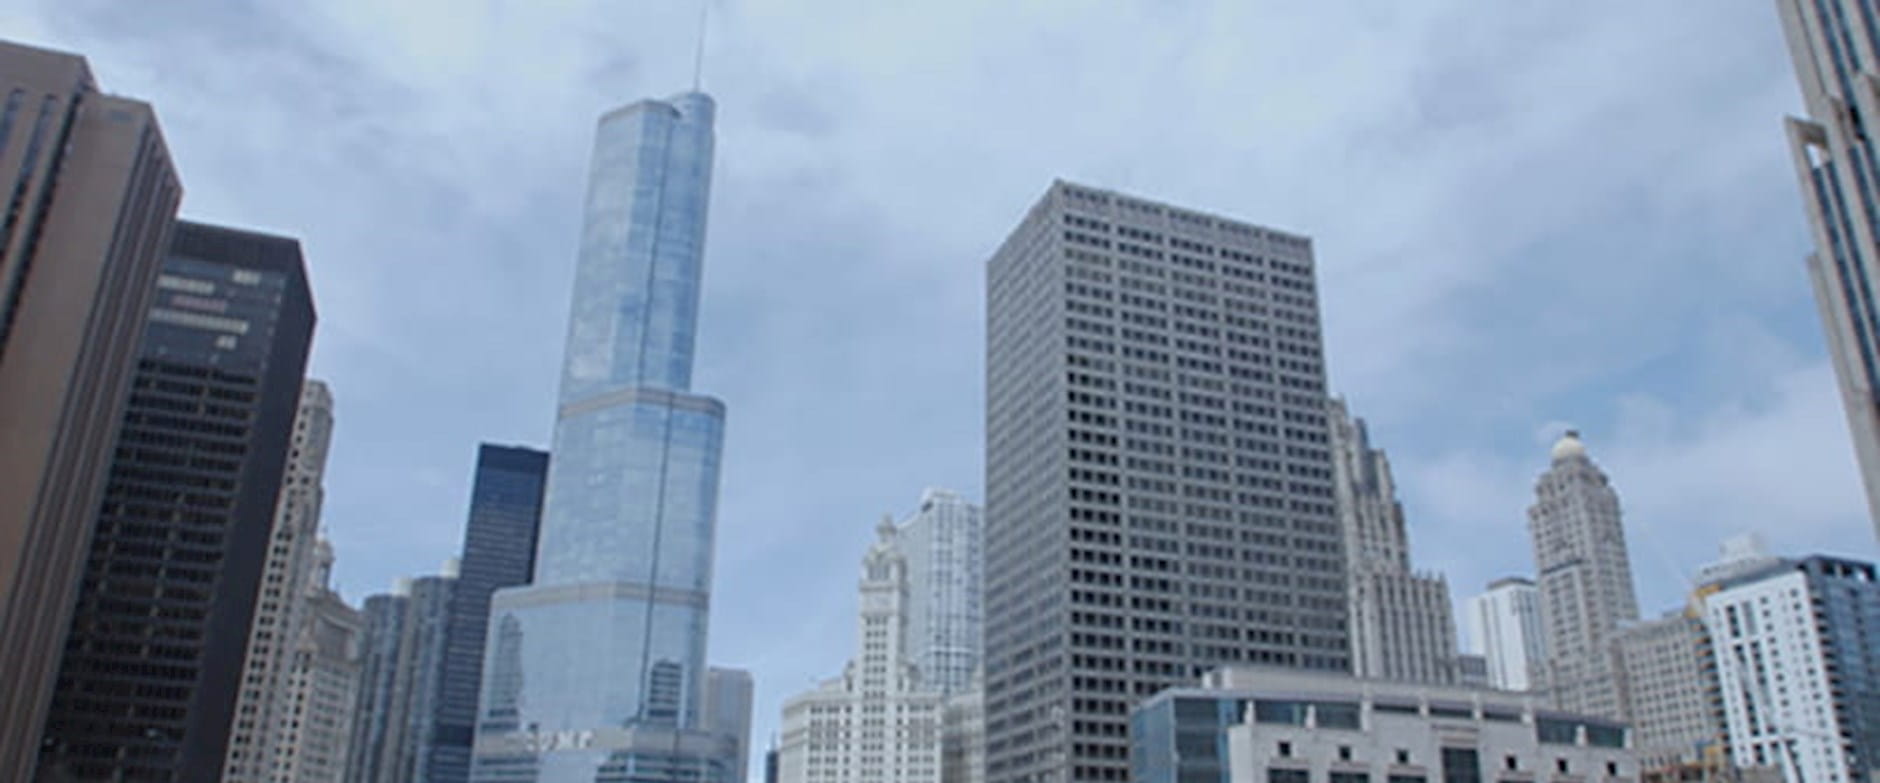 Chicago Skyline from river